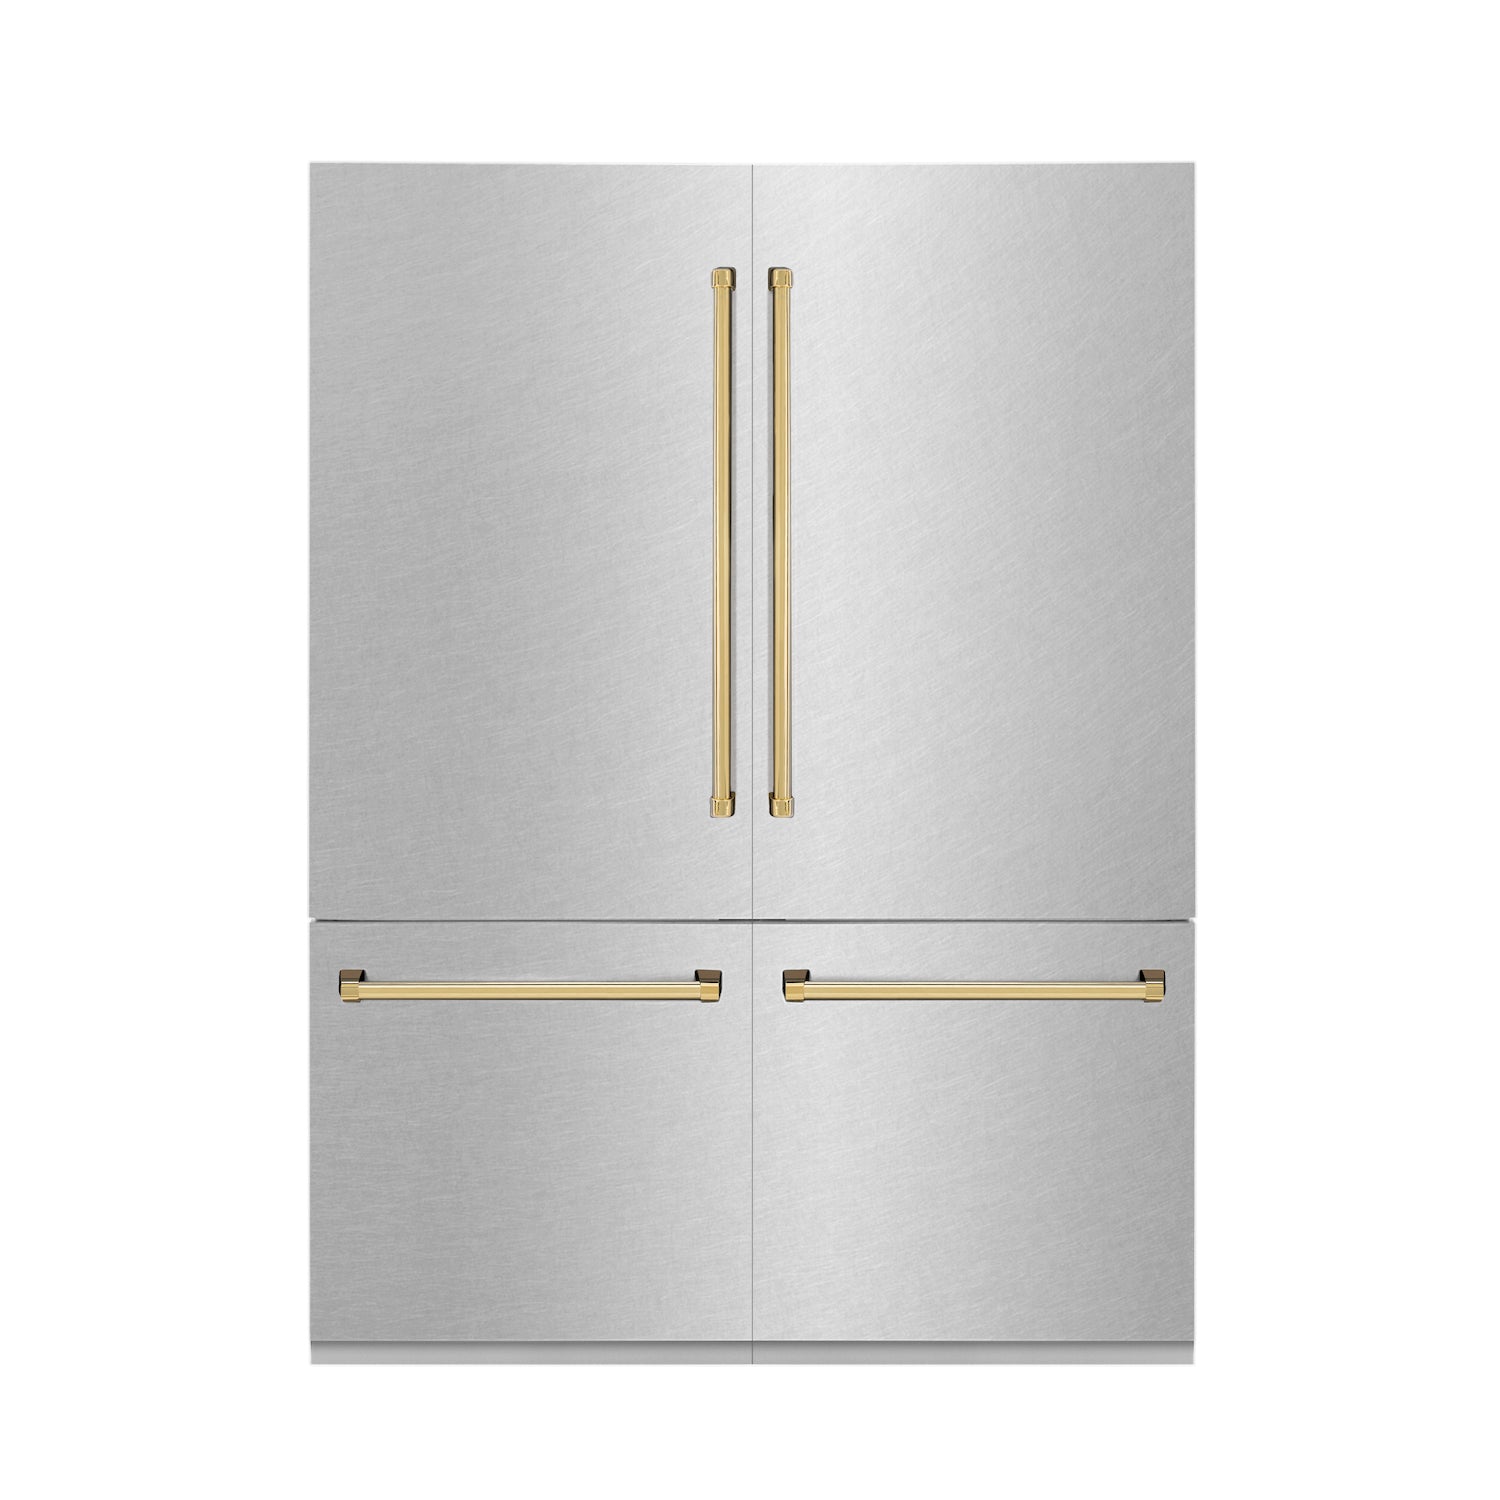 ZLINE 60" Built-in Refrigerator with DuraSnow Stainless Steel panels front.